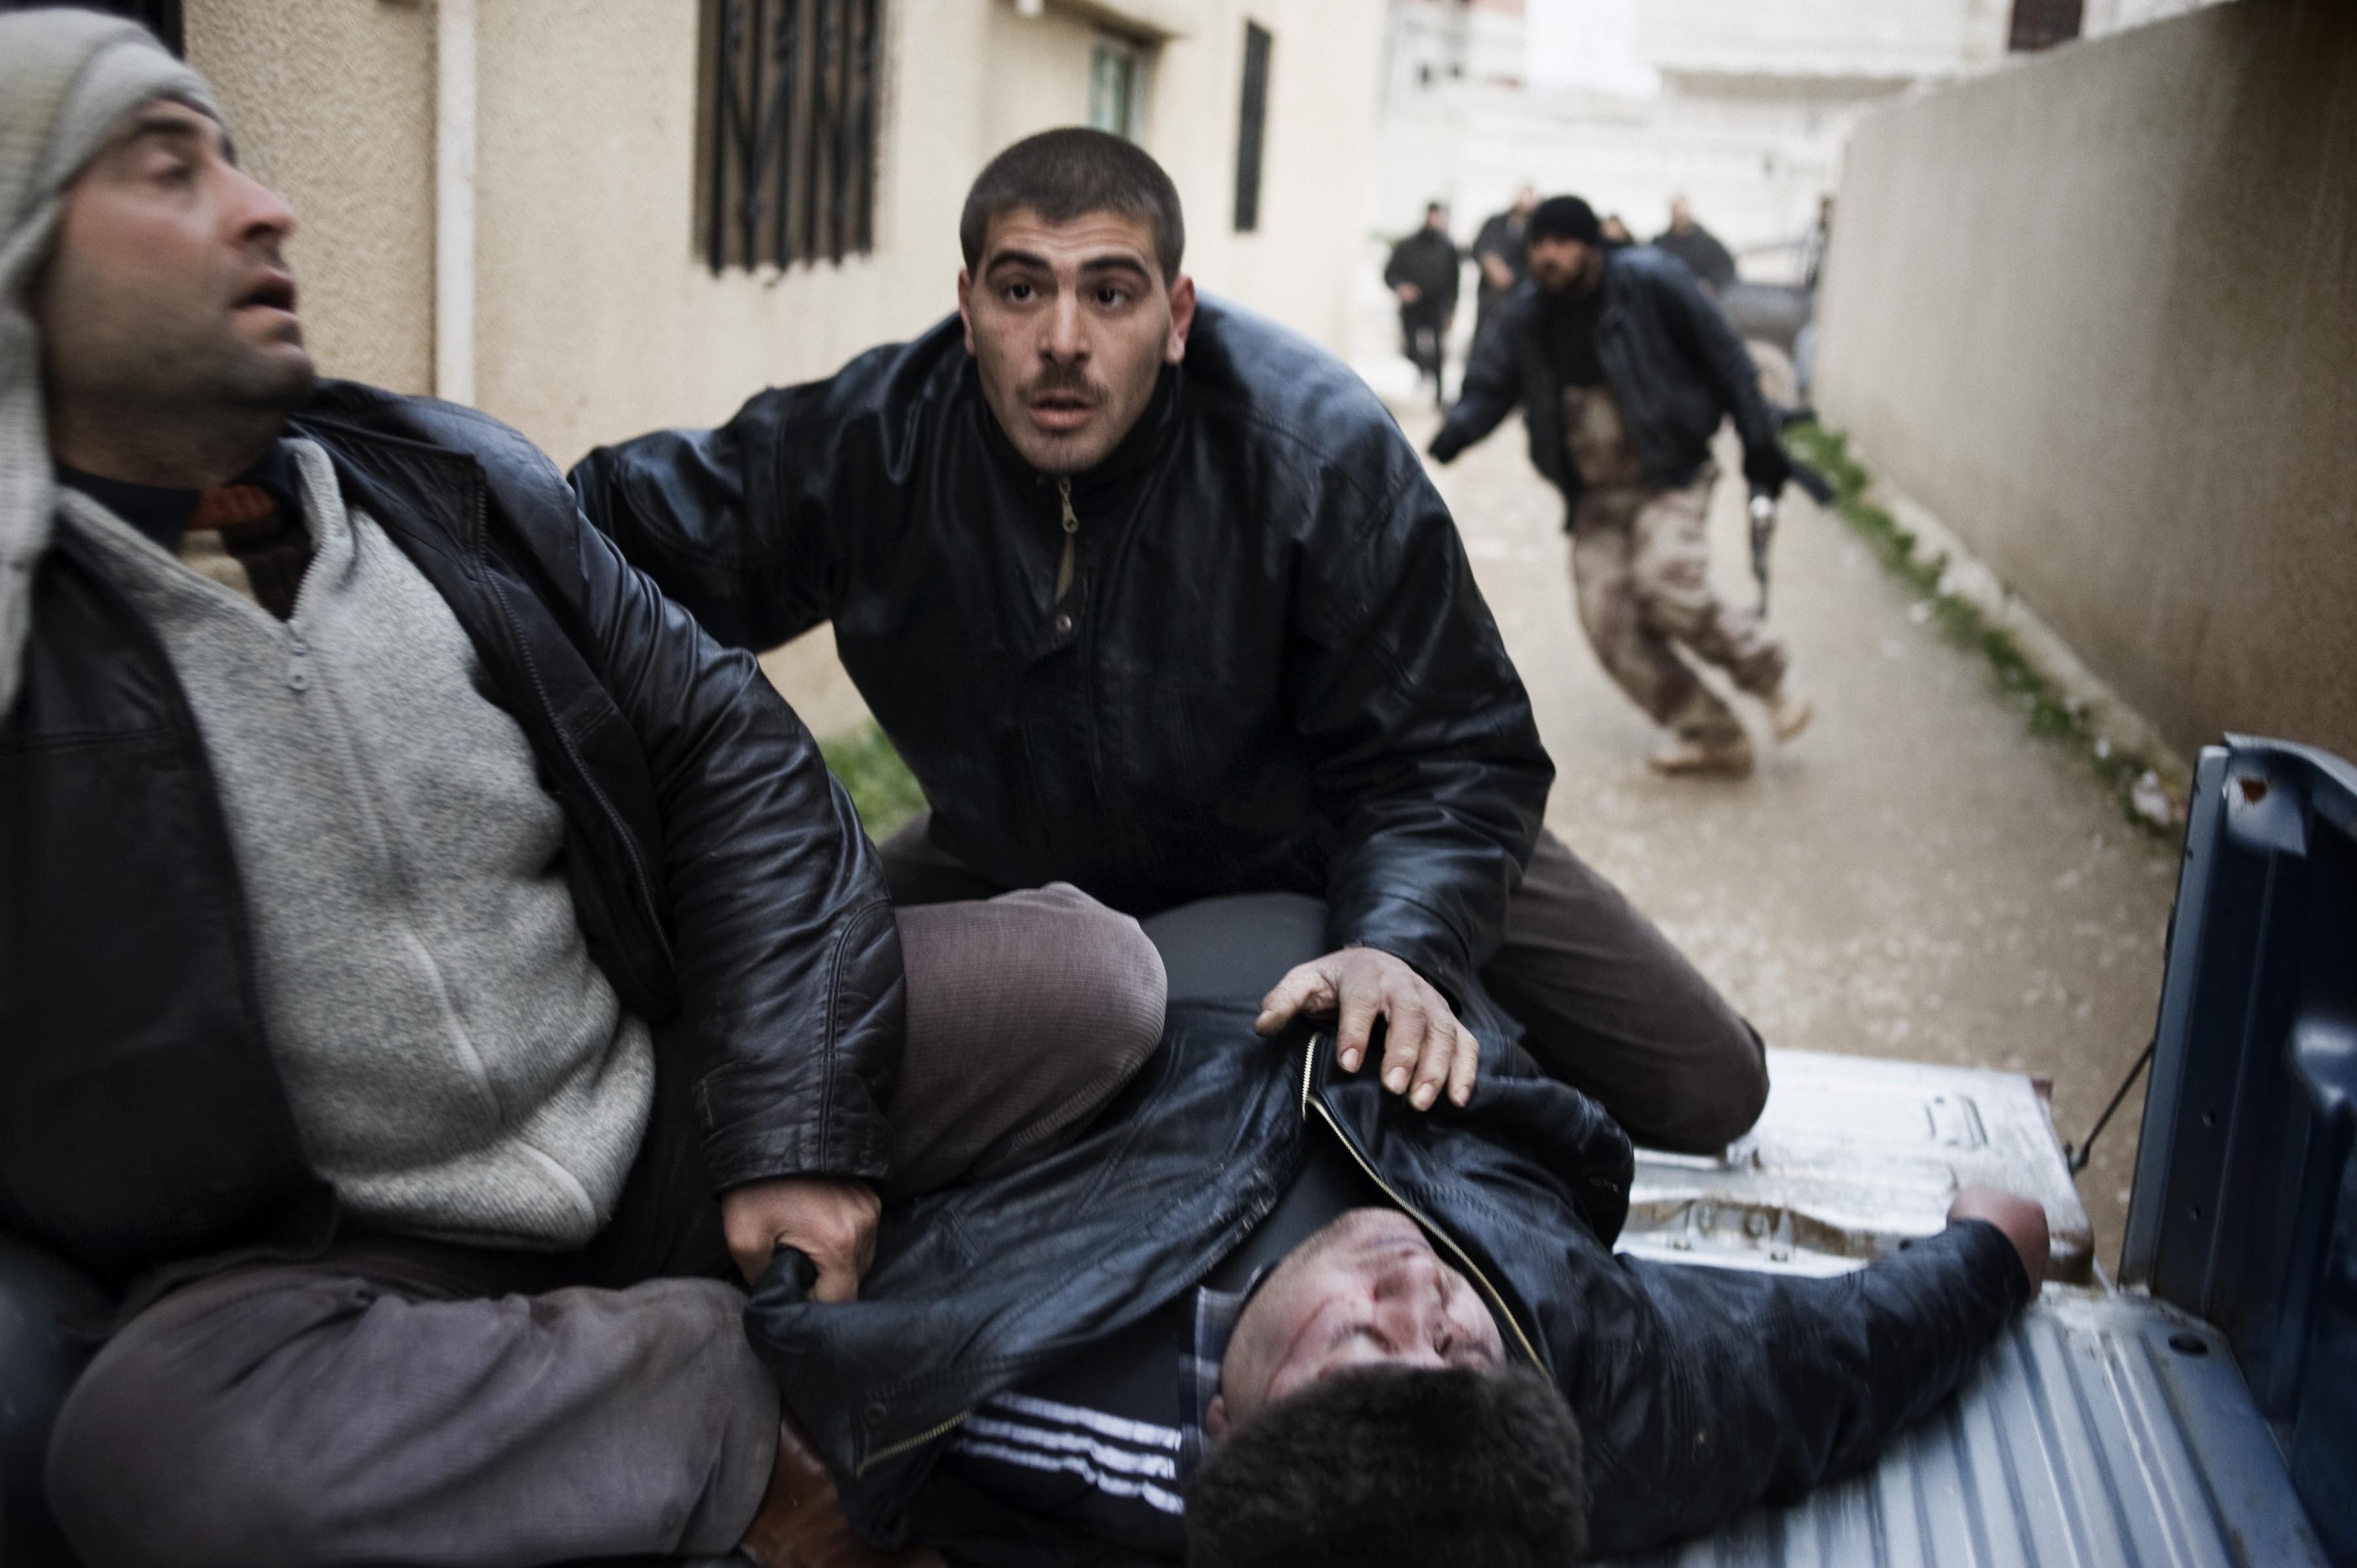 Feb. 22, 2012. Syrian men take a heavily wounded man into a house used as a hospital in Homs Province.